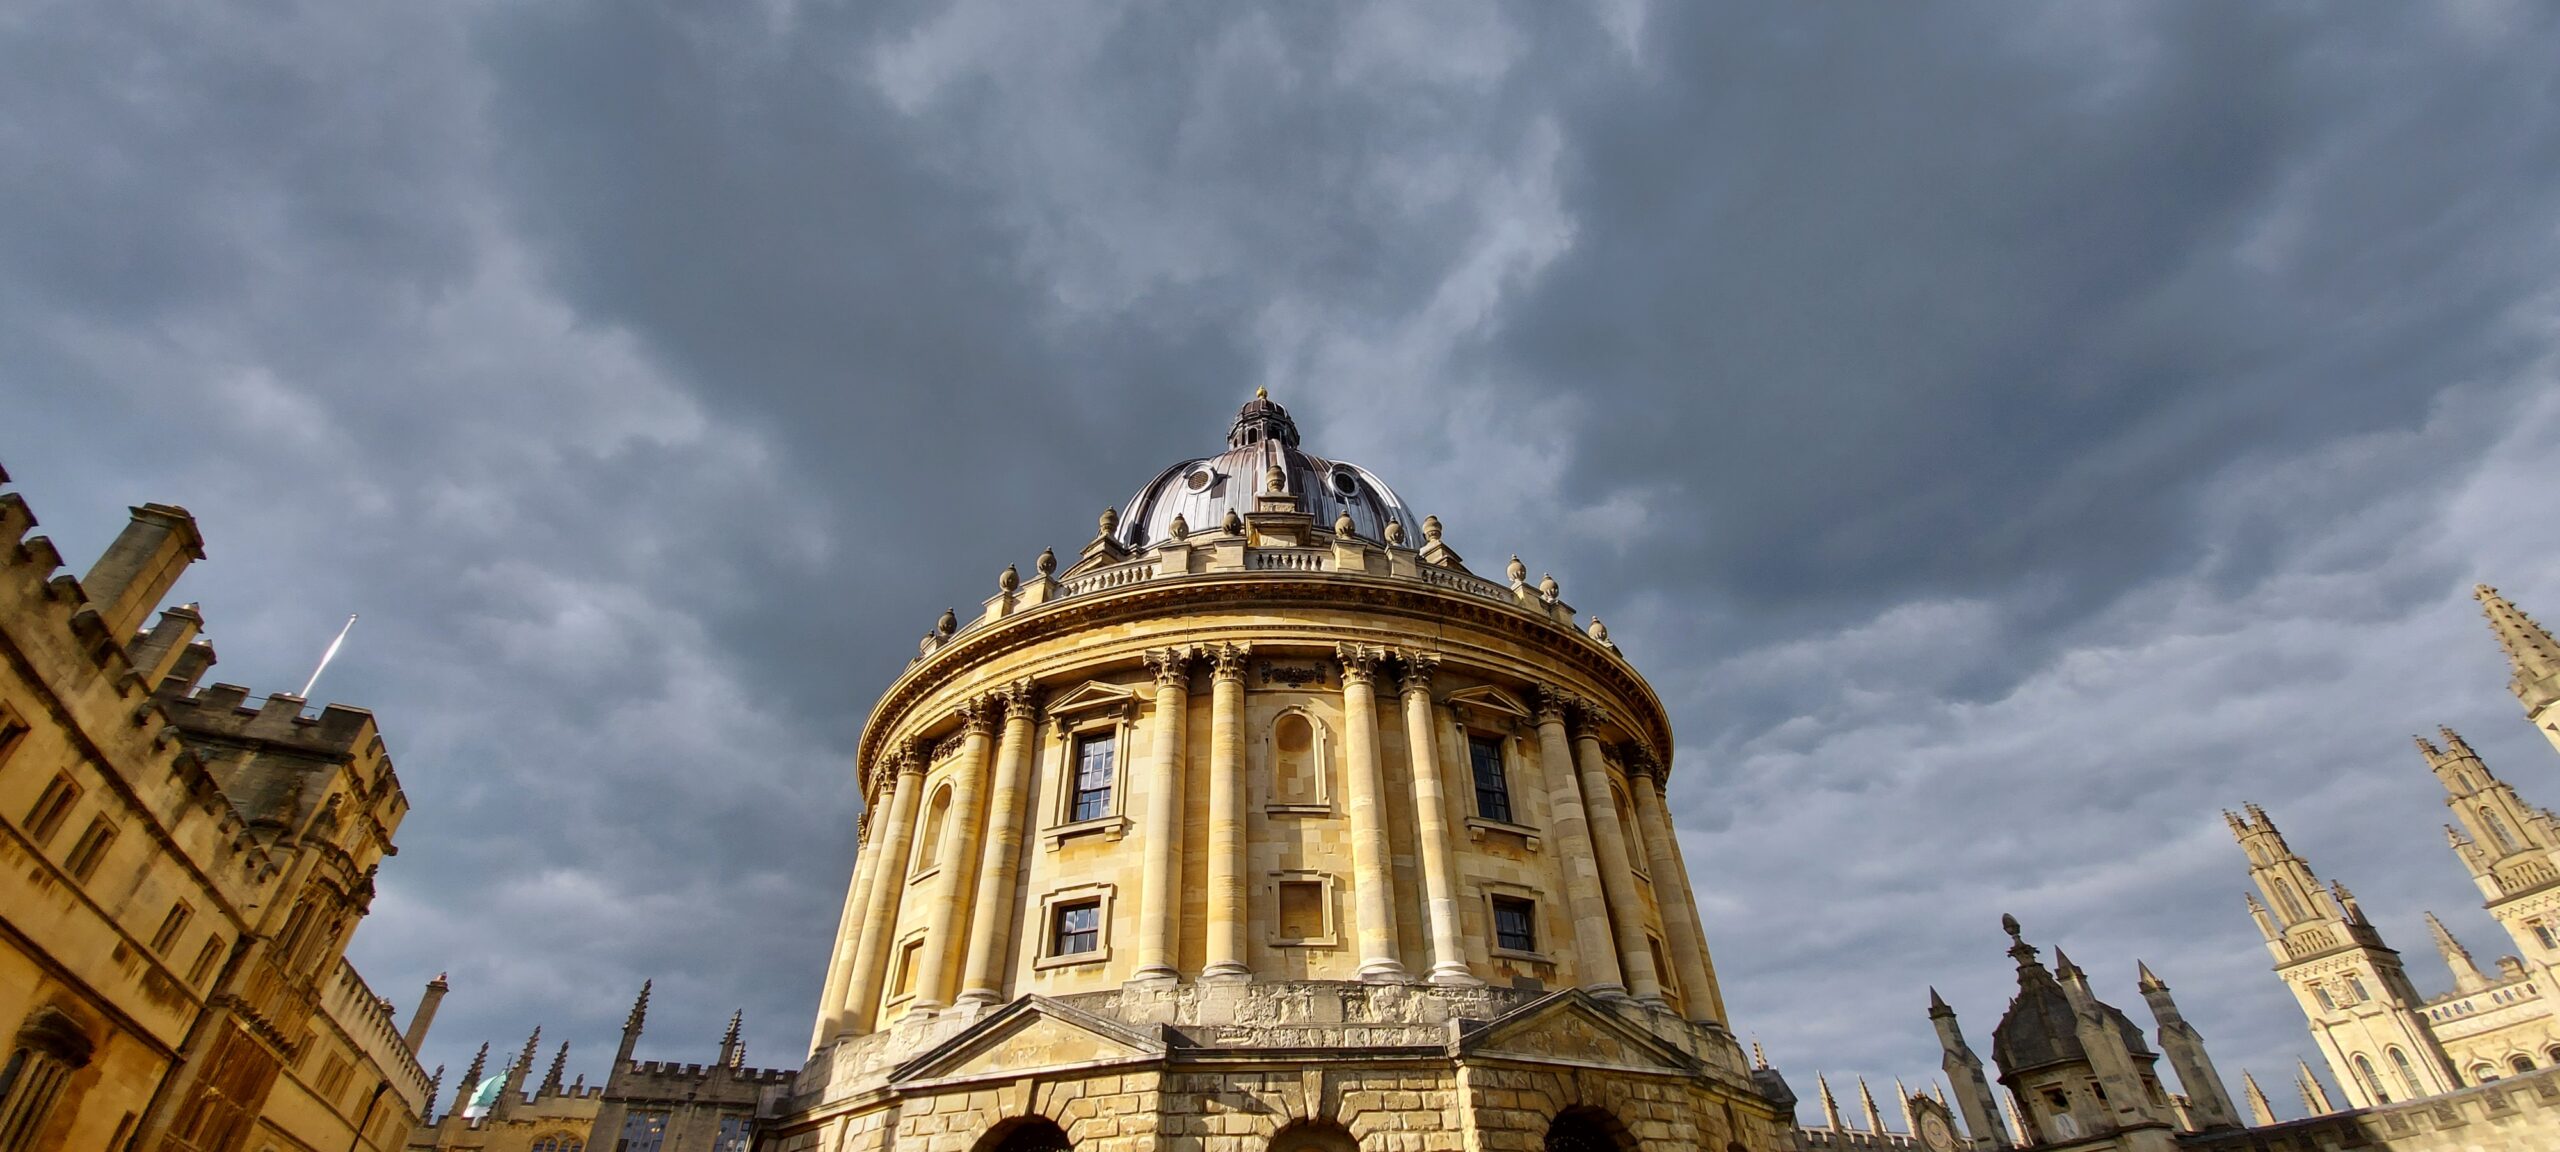 Investigation reveals “unacceptable” levels of sexual harassment across University of Oxford